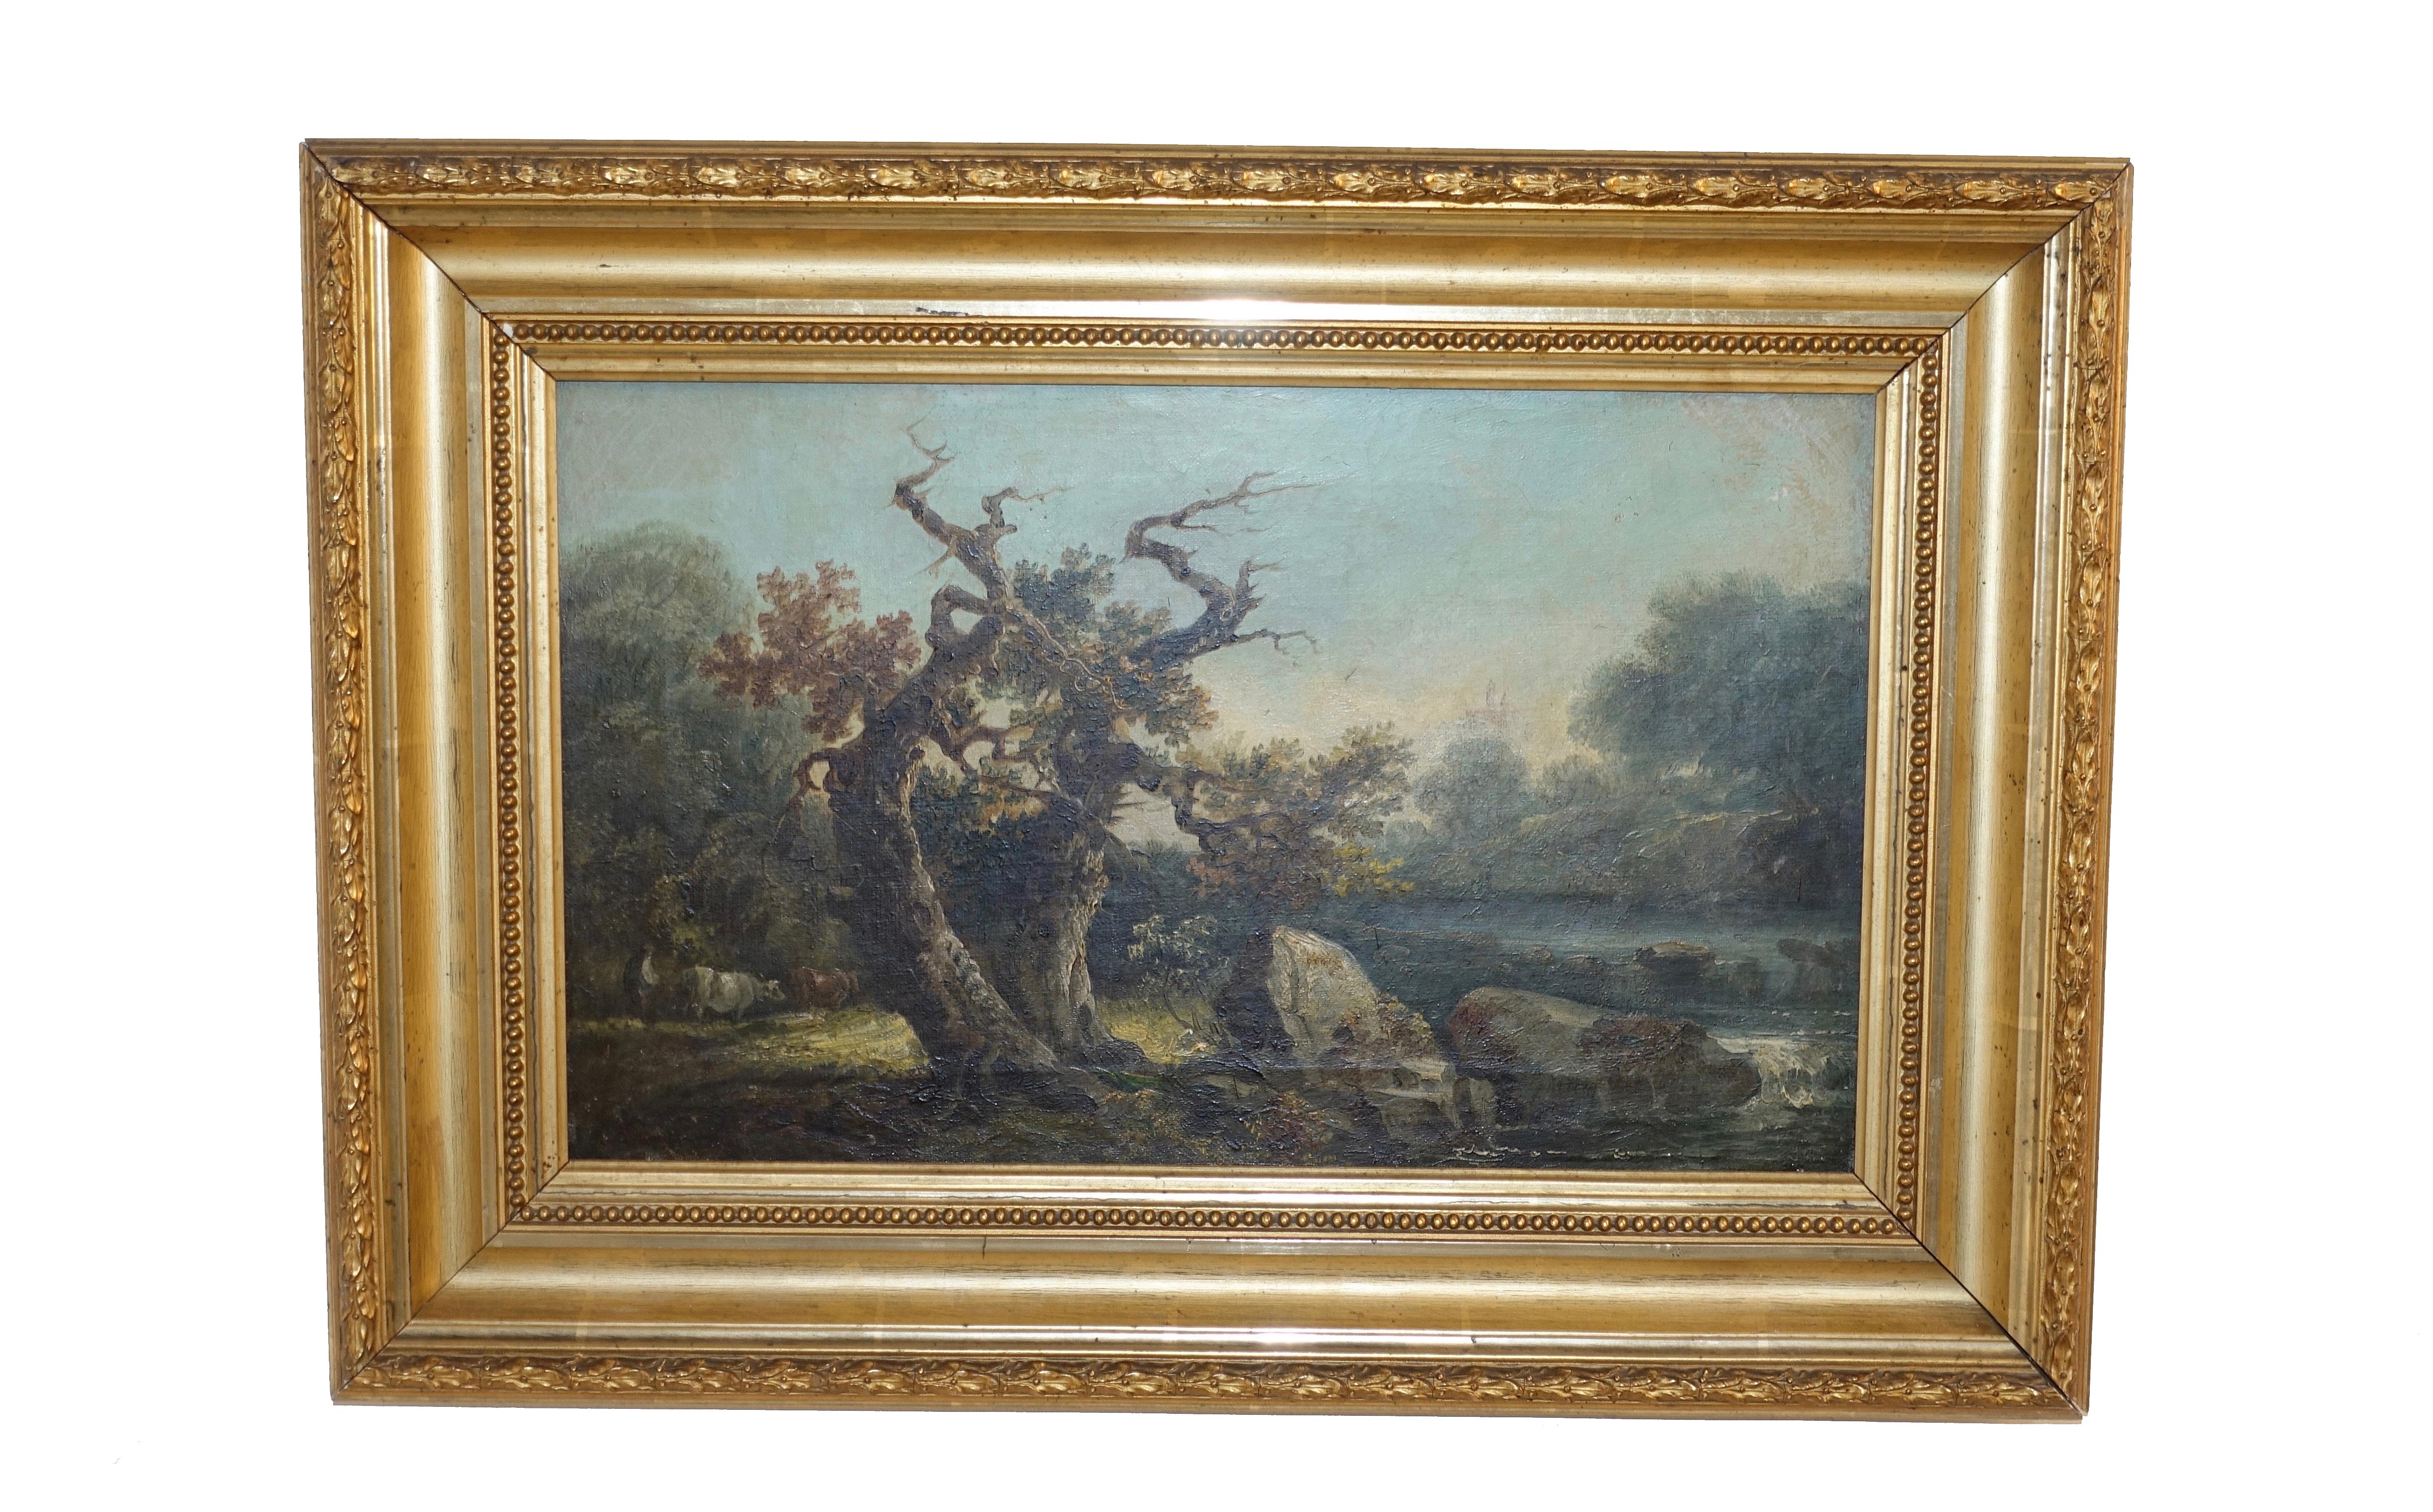 Gilt English Landscape Painting with Cows Grazing by Stream, 19th Century